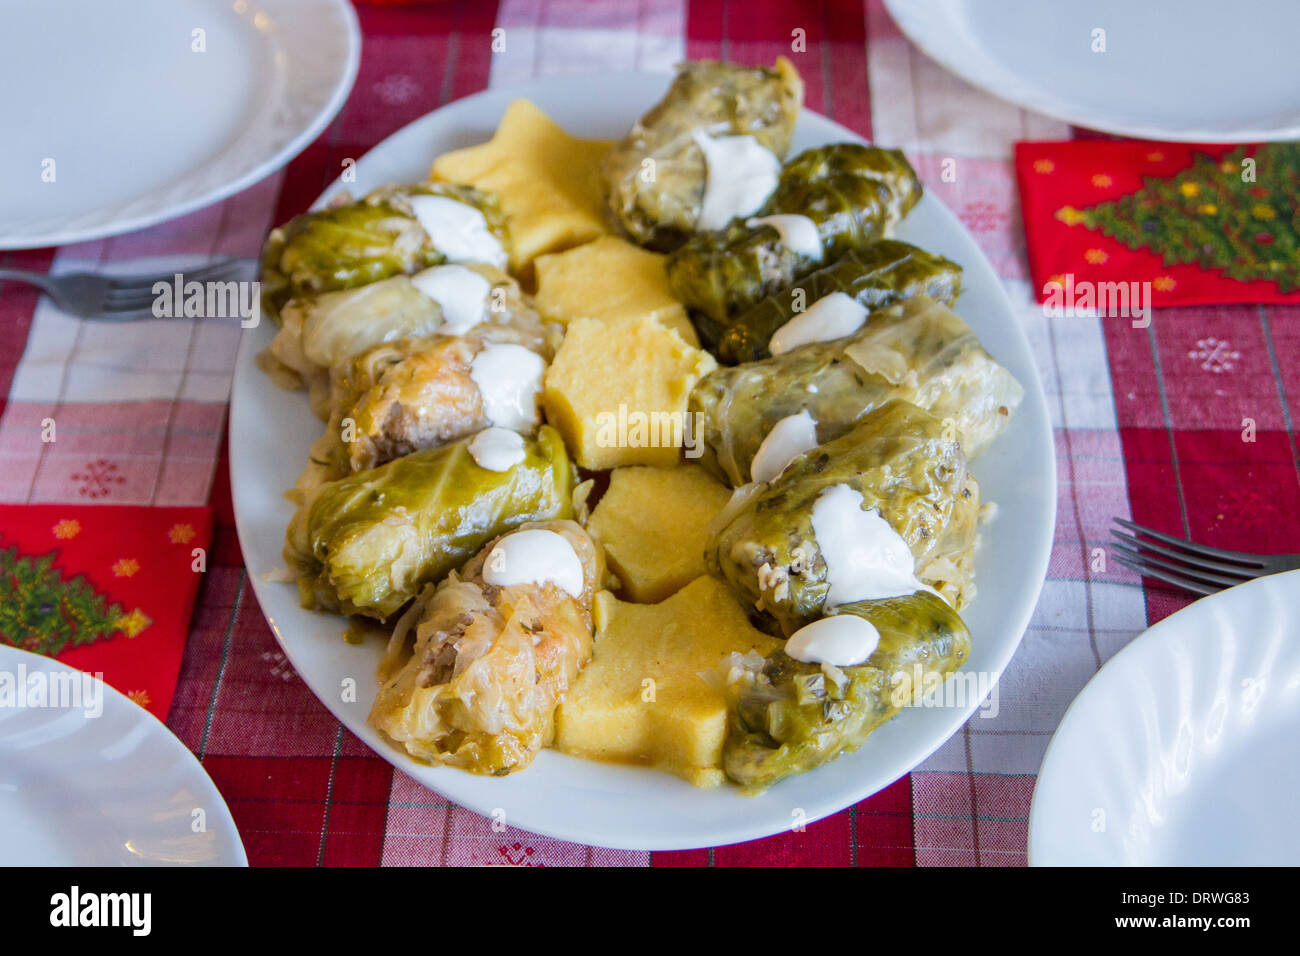 Romanian traditional cuisine, sarmale (rolls stuffed cabbage with meat) and polenta. Stock Photo